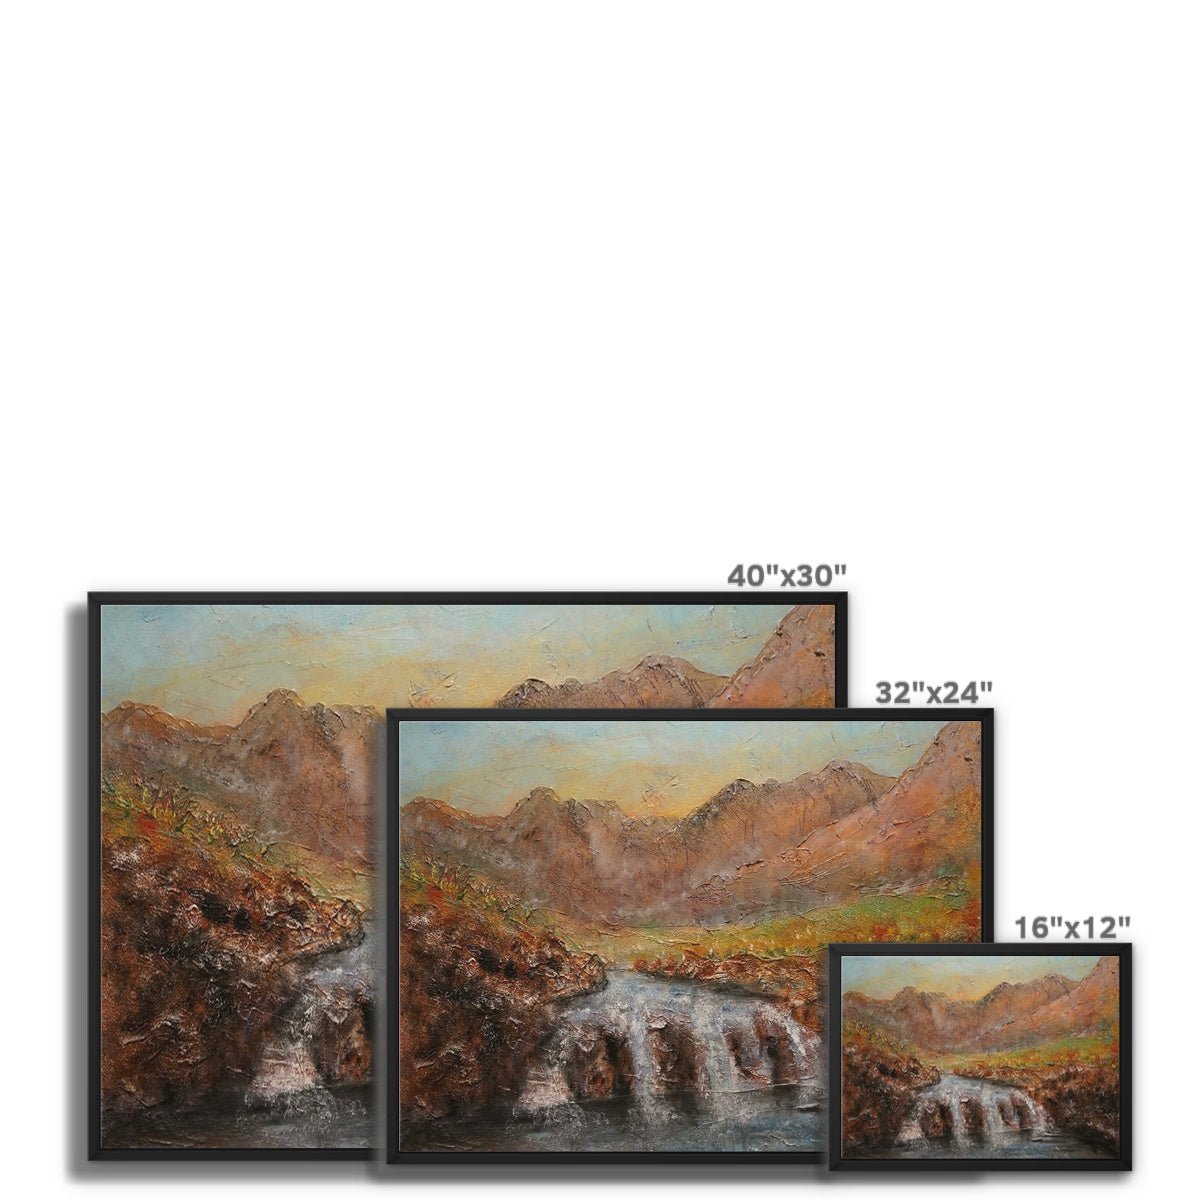 Fairy Pools Dawn Skye Painting | Framed Canvas From Scotland-Floating Framed Canvas Prints-Skye Art Gallery-Paintings, Prints, Homeware, Art Gifts From Scotland By Scottish Artist Kevin Hunter